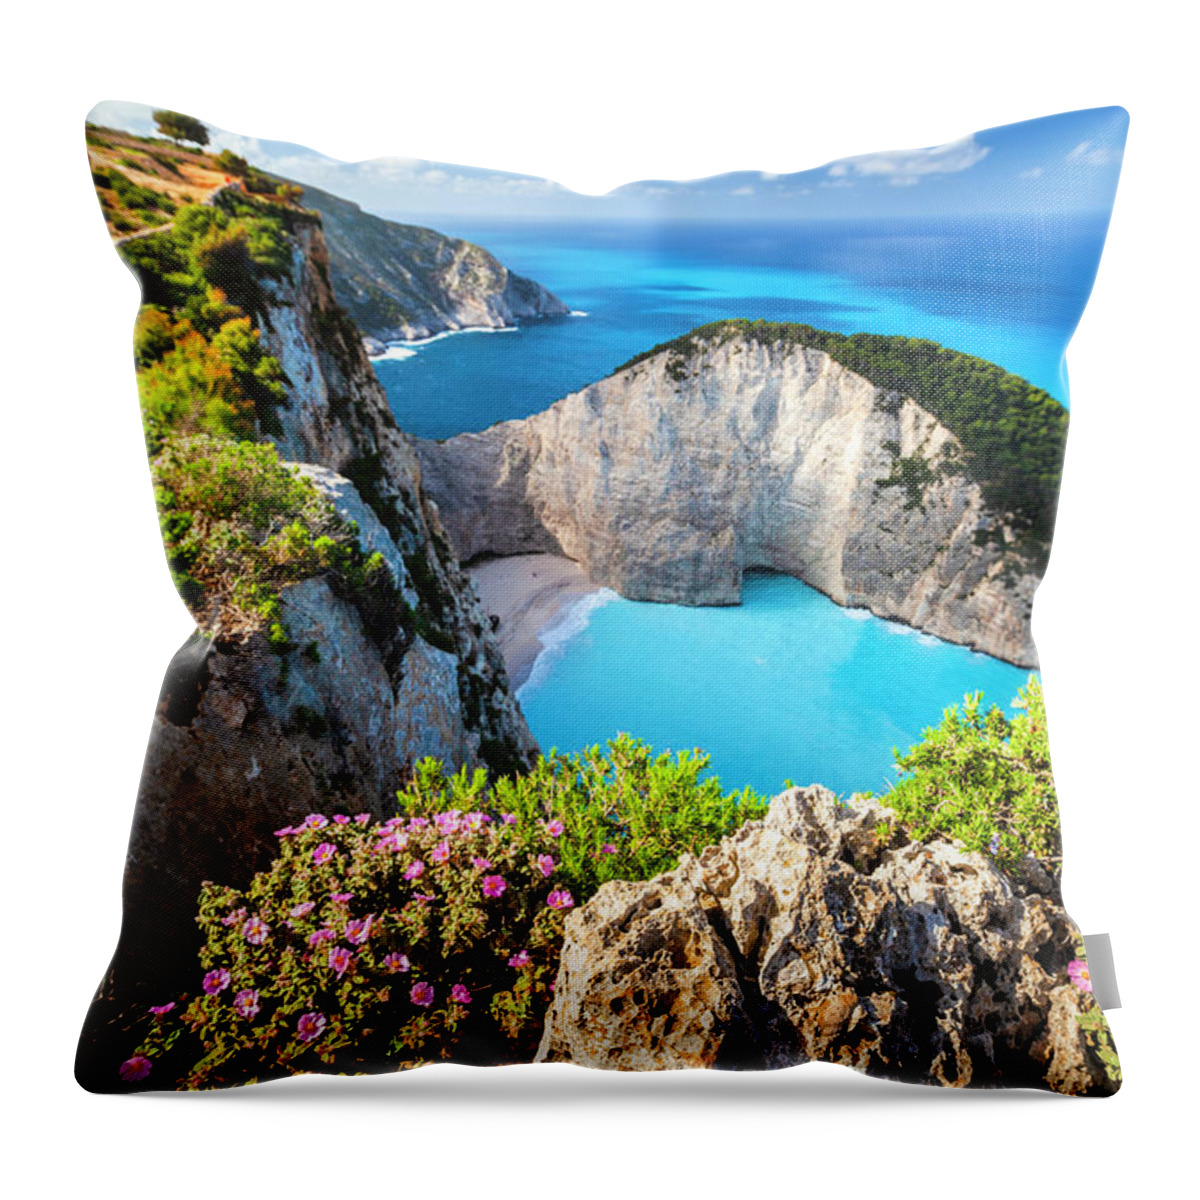 Greece Throw Pillow featuring the photograph Navagio Bay by Evgeni Dinev